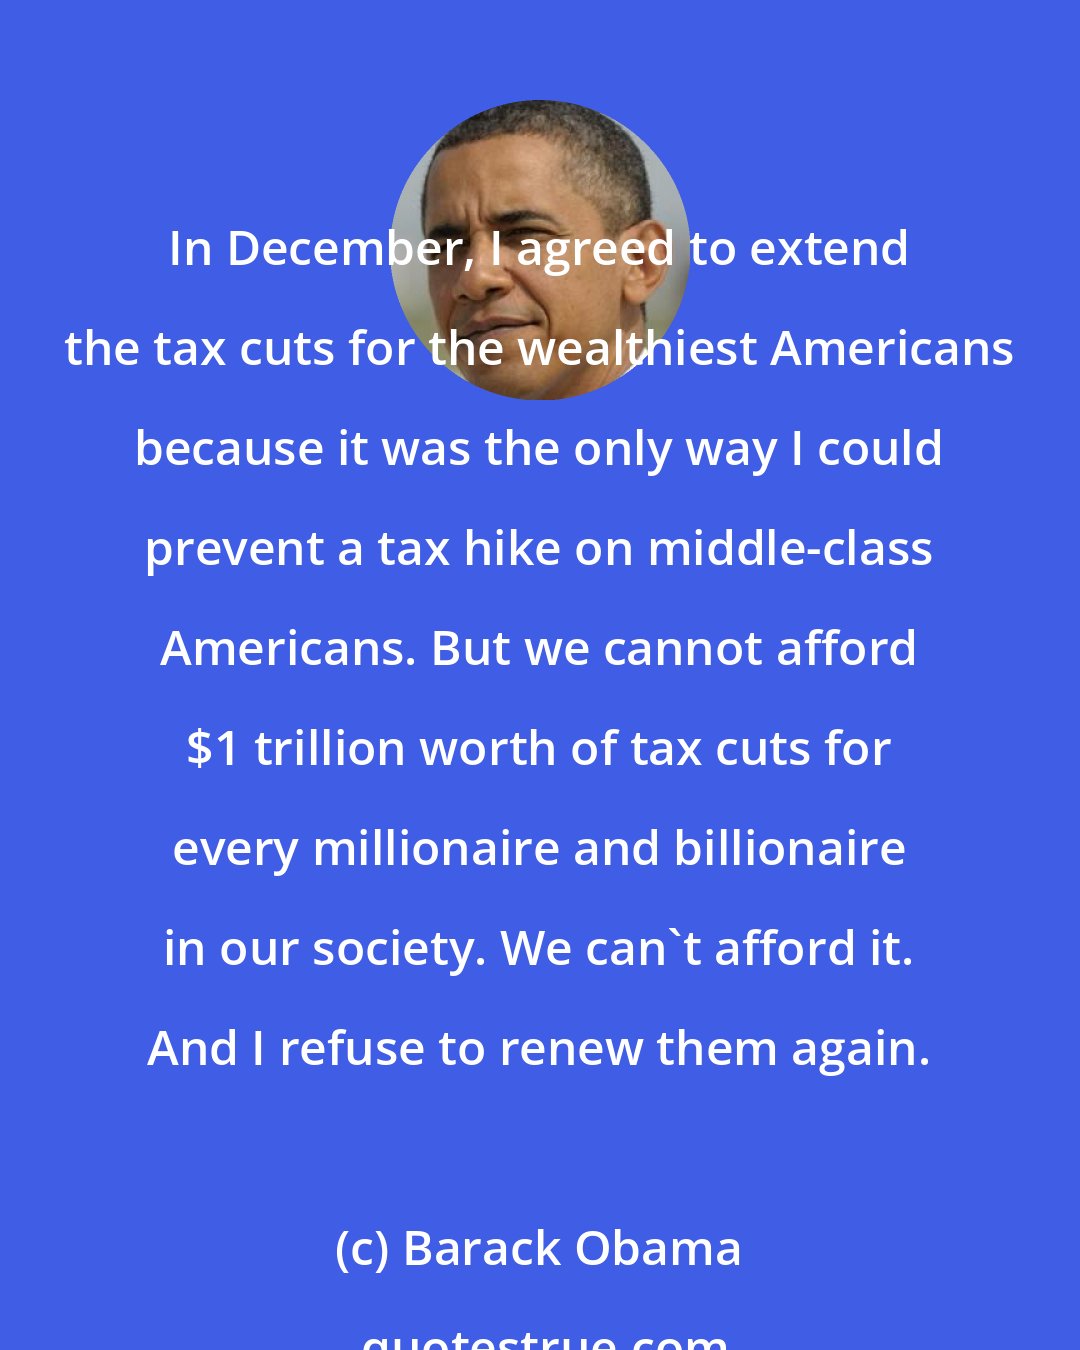 Barack Obama: In December, I agreed to extend the tax cuts for the wealthiest Americans because it was the only way I could prevent a tax hike on middle-class Americans. But we cannot afford $1 trillion worth of tax cuts for every millionaire and billionaire in our society. We can't afford it. And I refuse to renew them again.